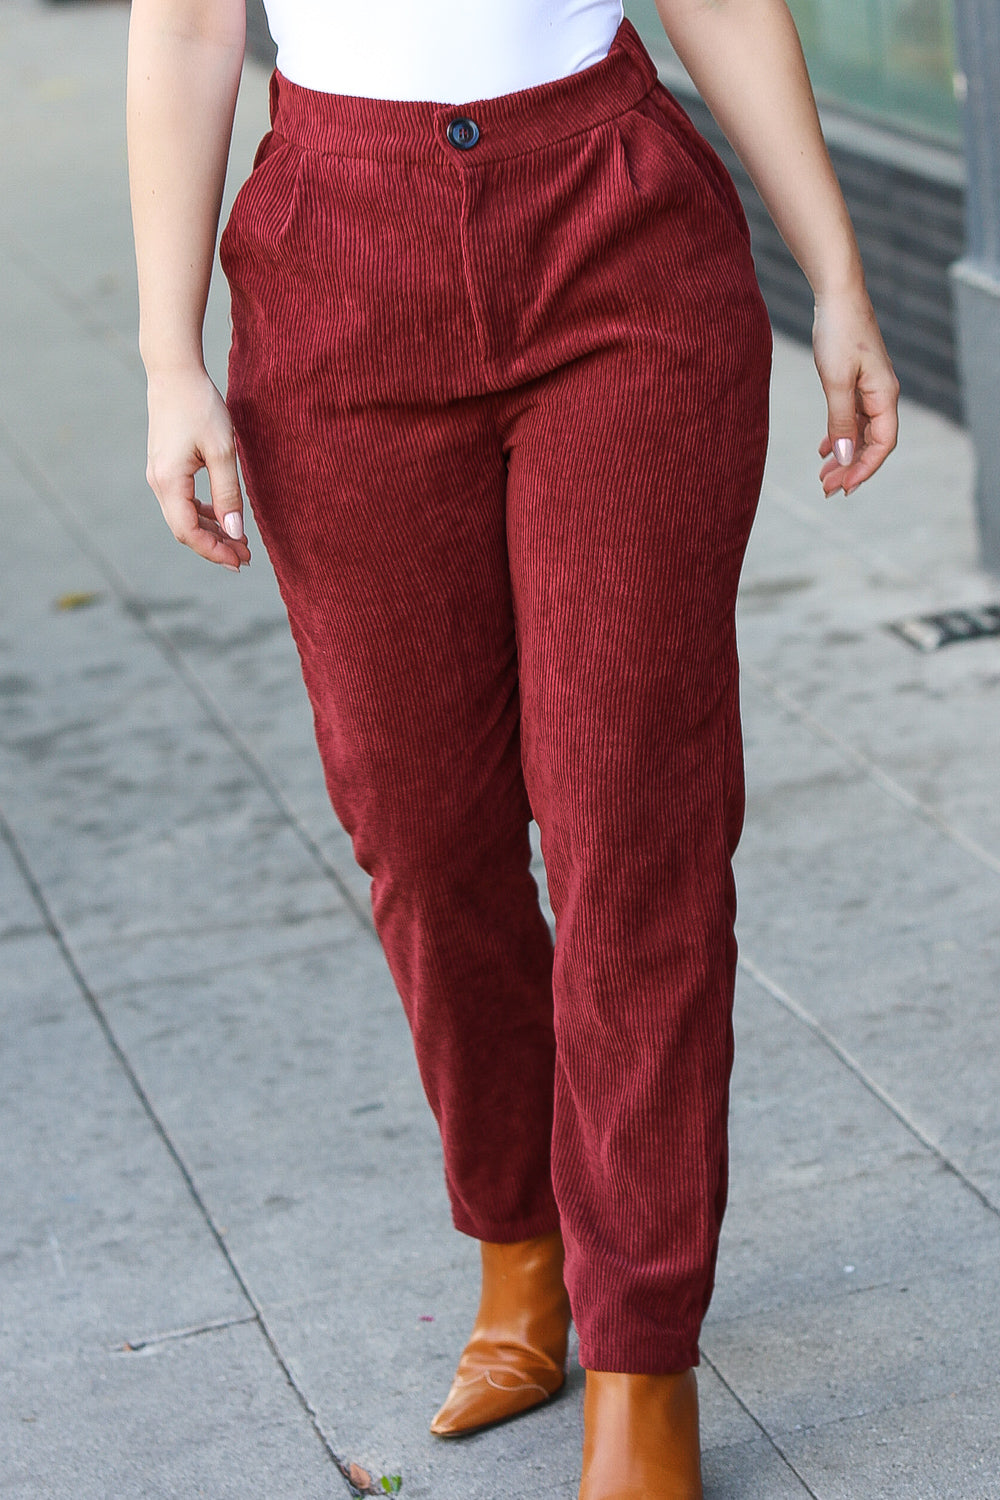 Going Your Way Burgundy Corduroy High Rise Tapered Pants - Sybaritic Bags & Clothing